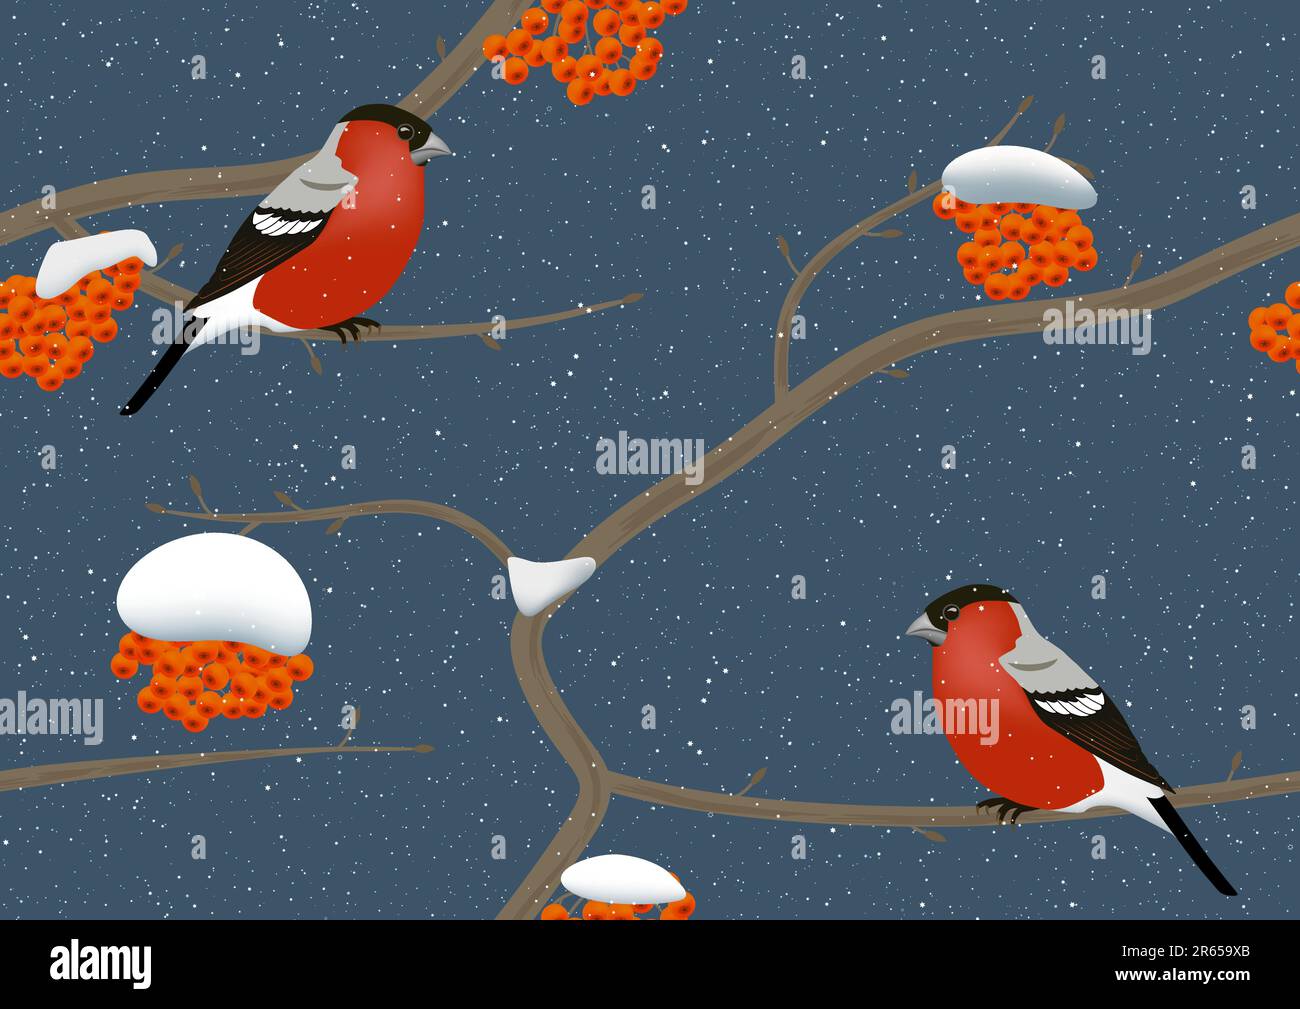 Seamless illustration of bullfinches on rowan tree in winter and snow  AI8 compatible eps file Stock Vector